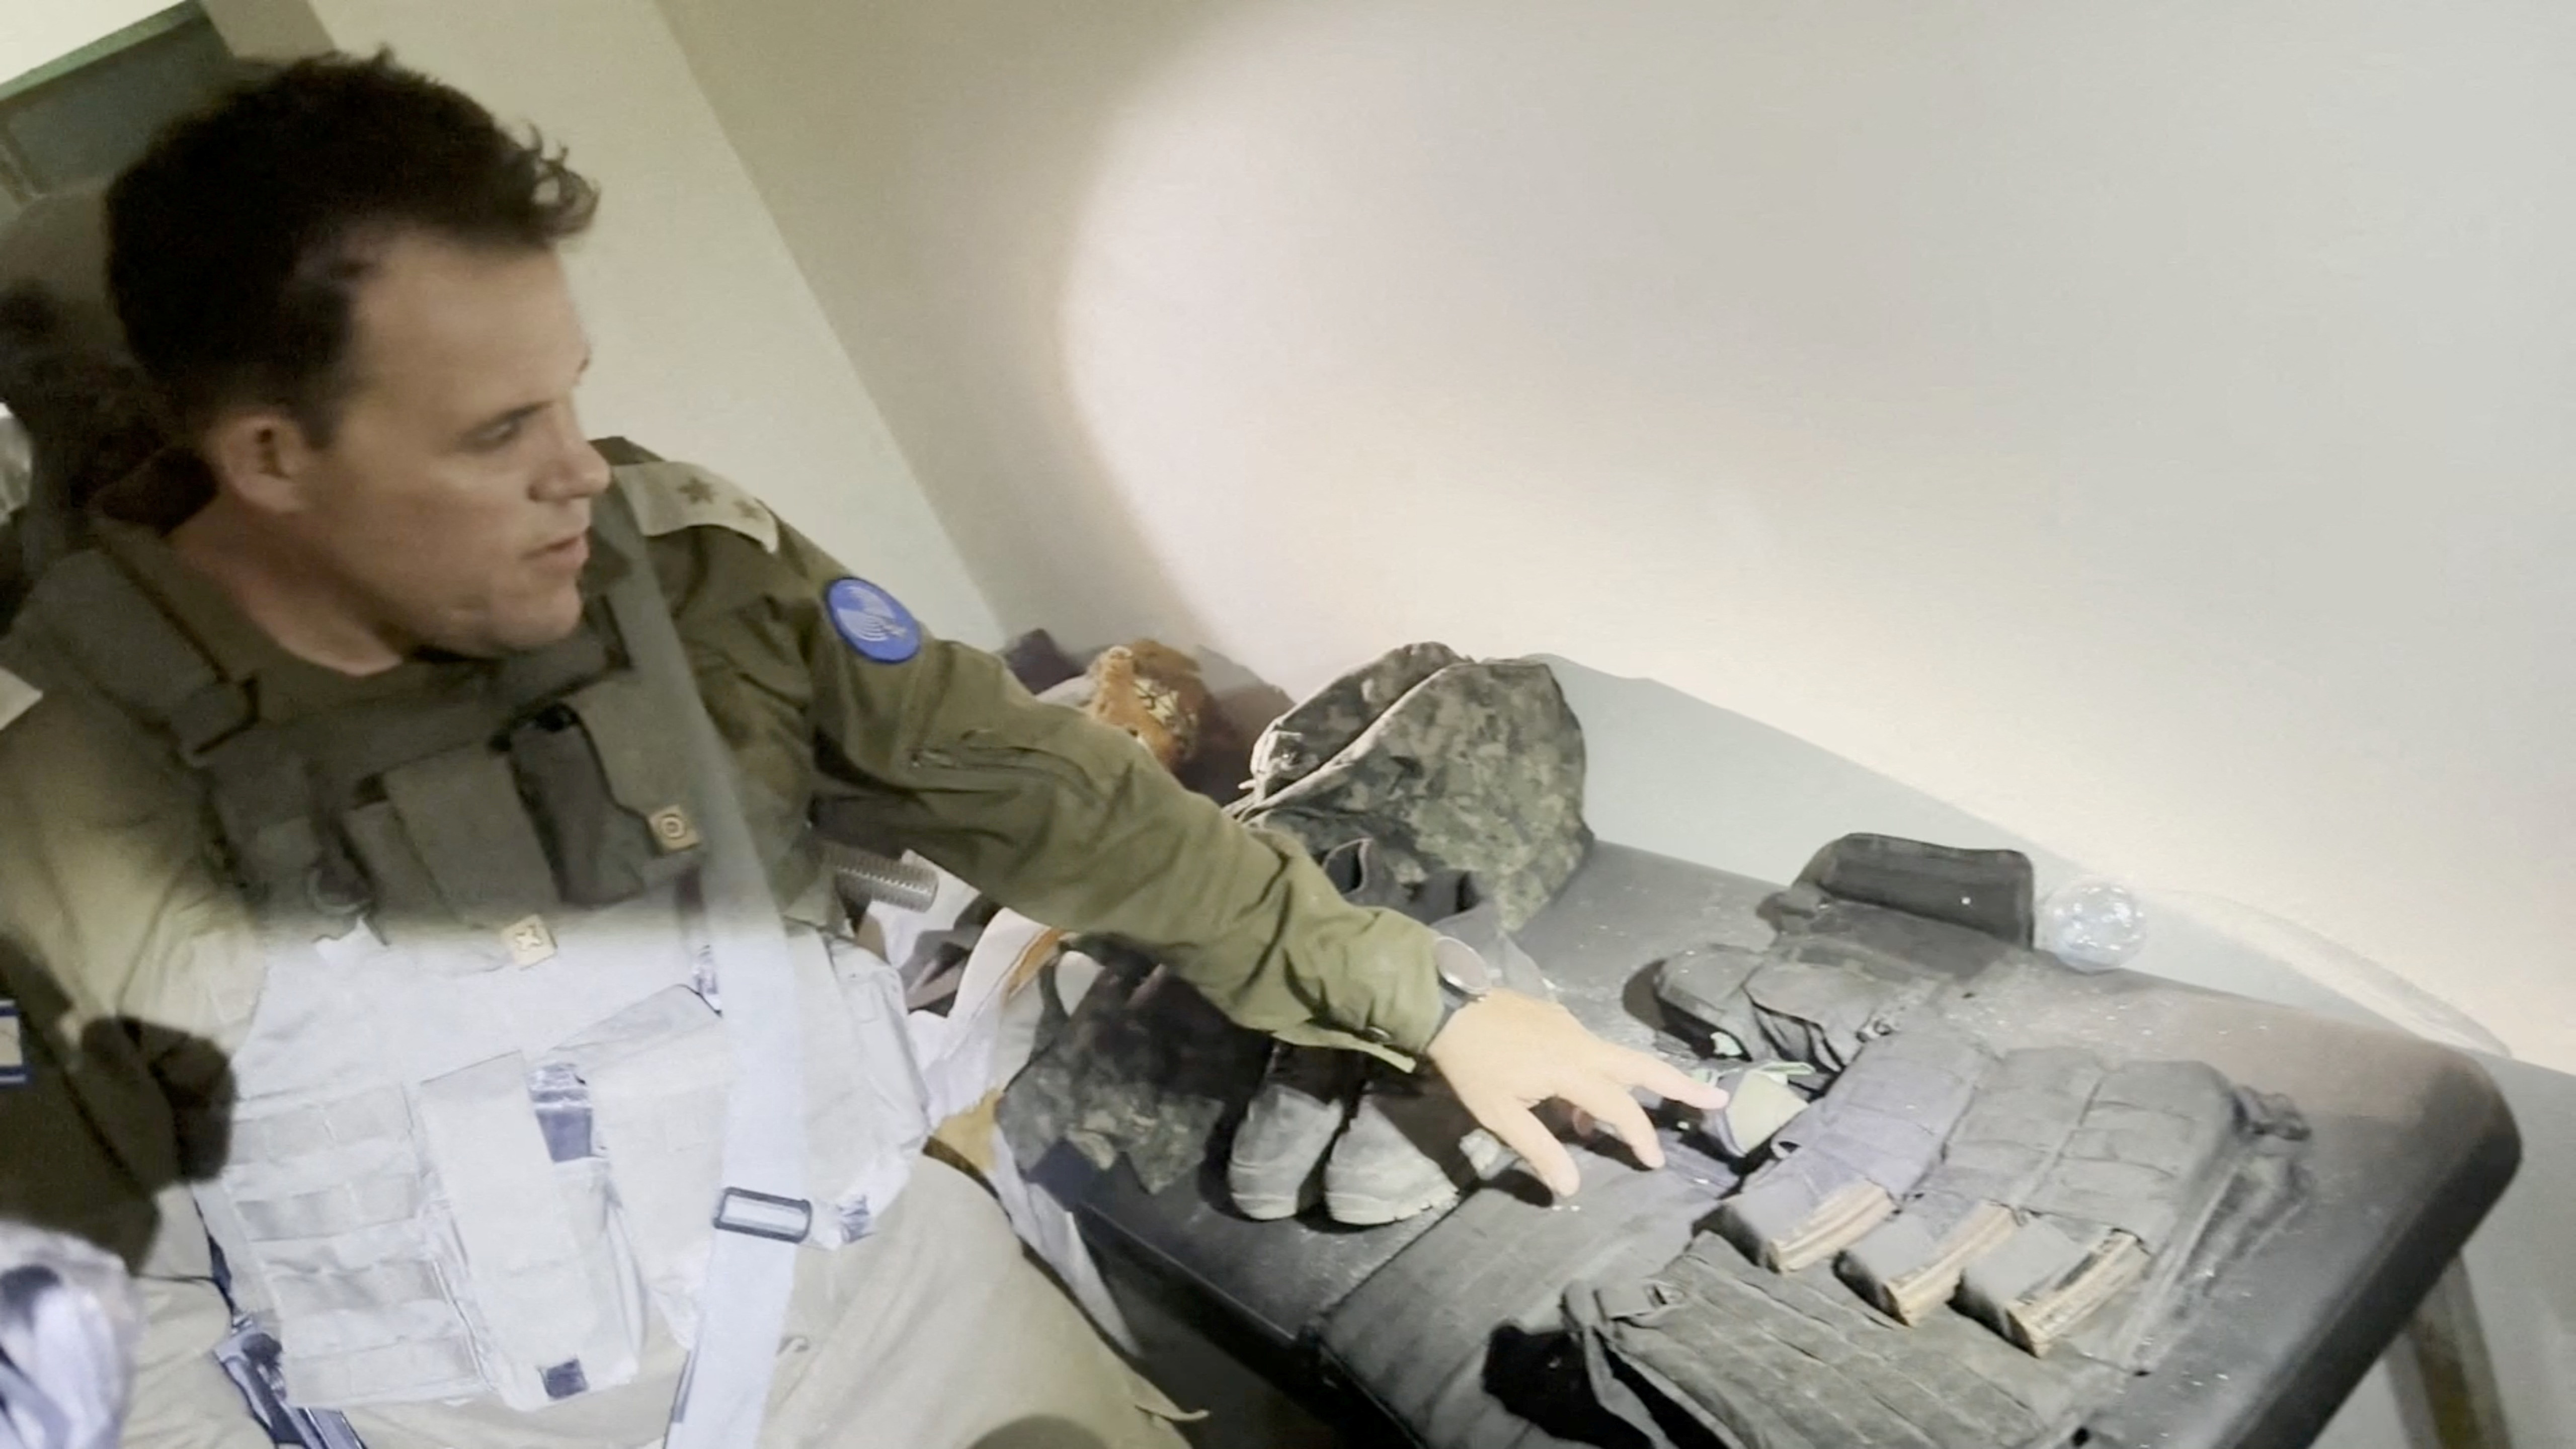 An Israeli soldier points at what the IDF says is a cache of Hamas weapons found inside Al Shifa hospital. /IDF/Reuters